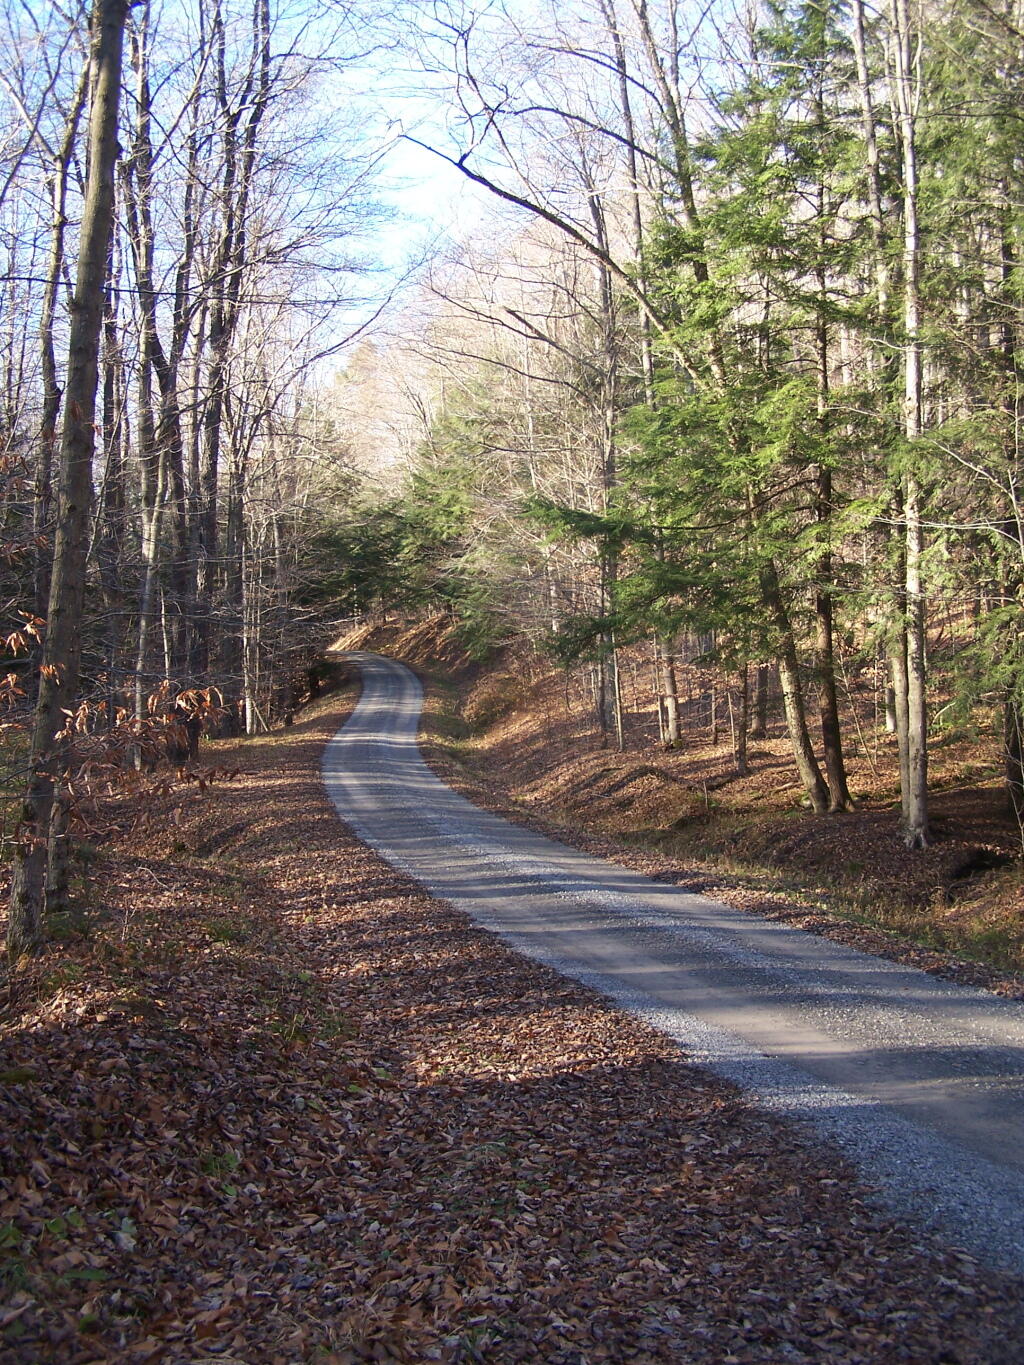 Forest Service Route 262